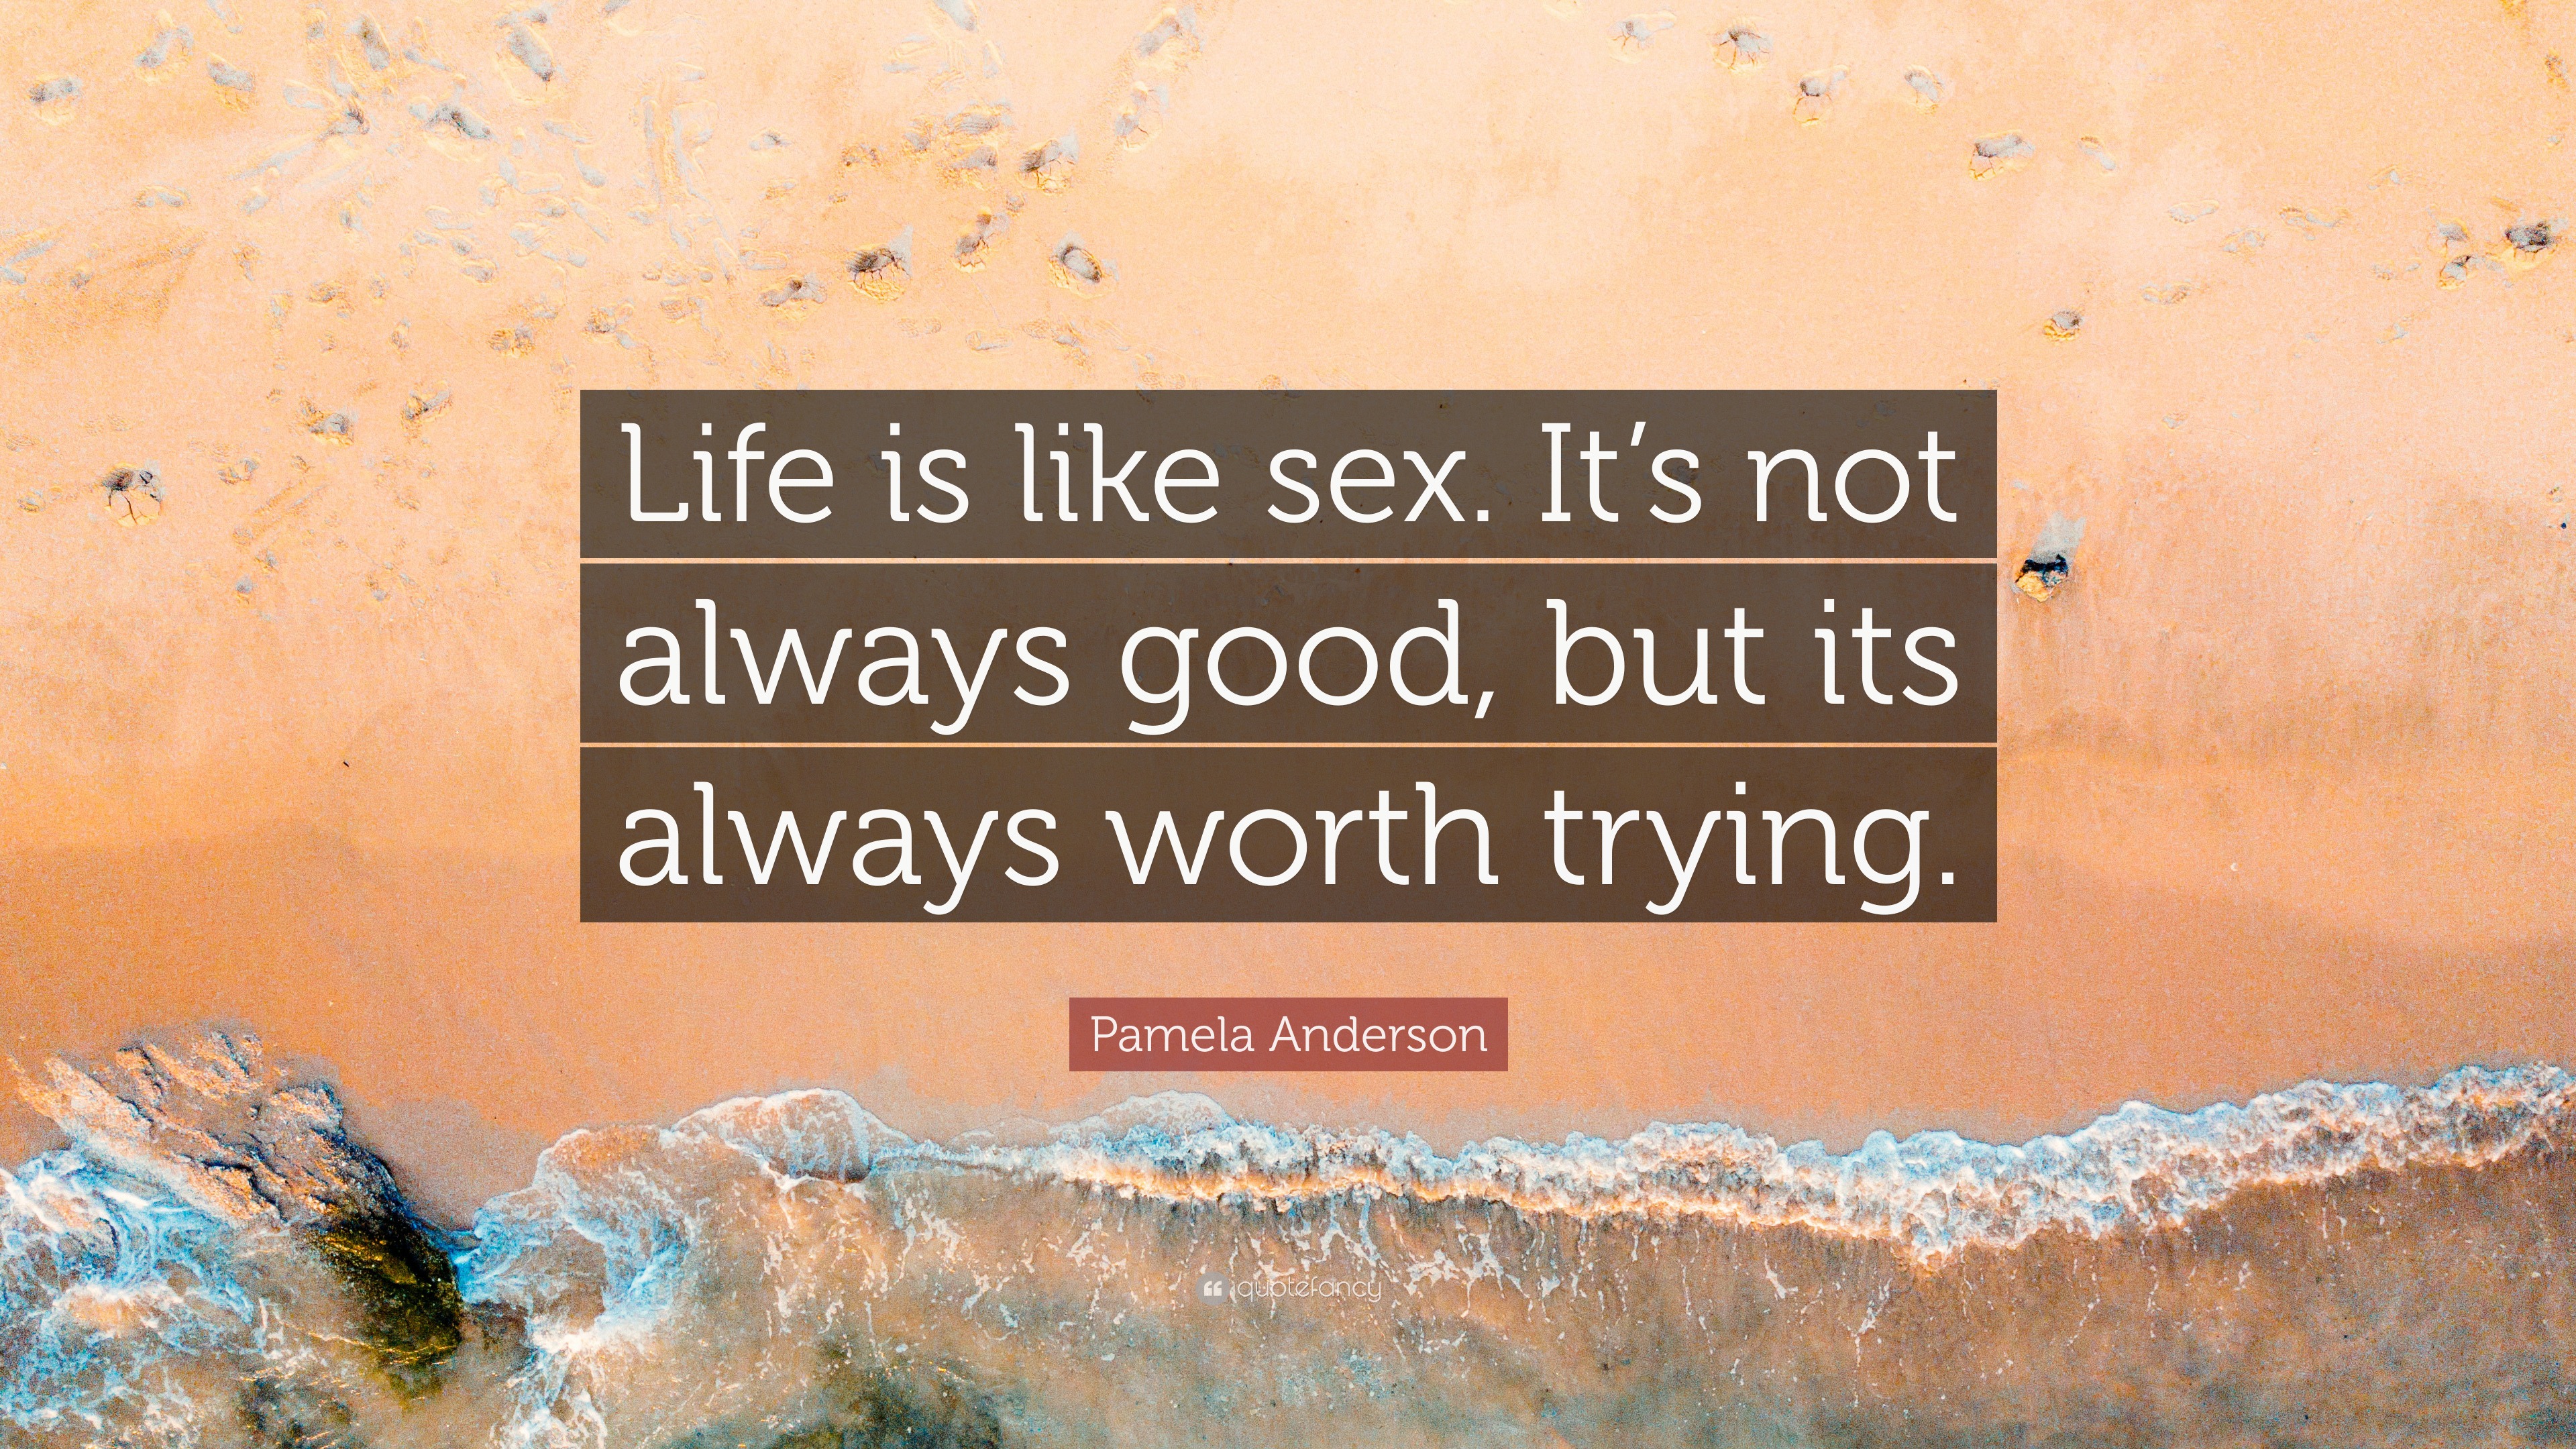 Pamela Anderson Quote “life Is Like Sex Its Not Always Good But Its Always Worth Trying” 